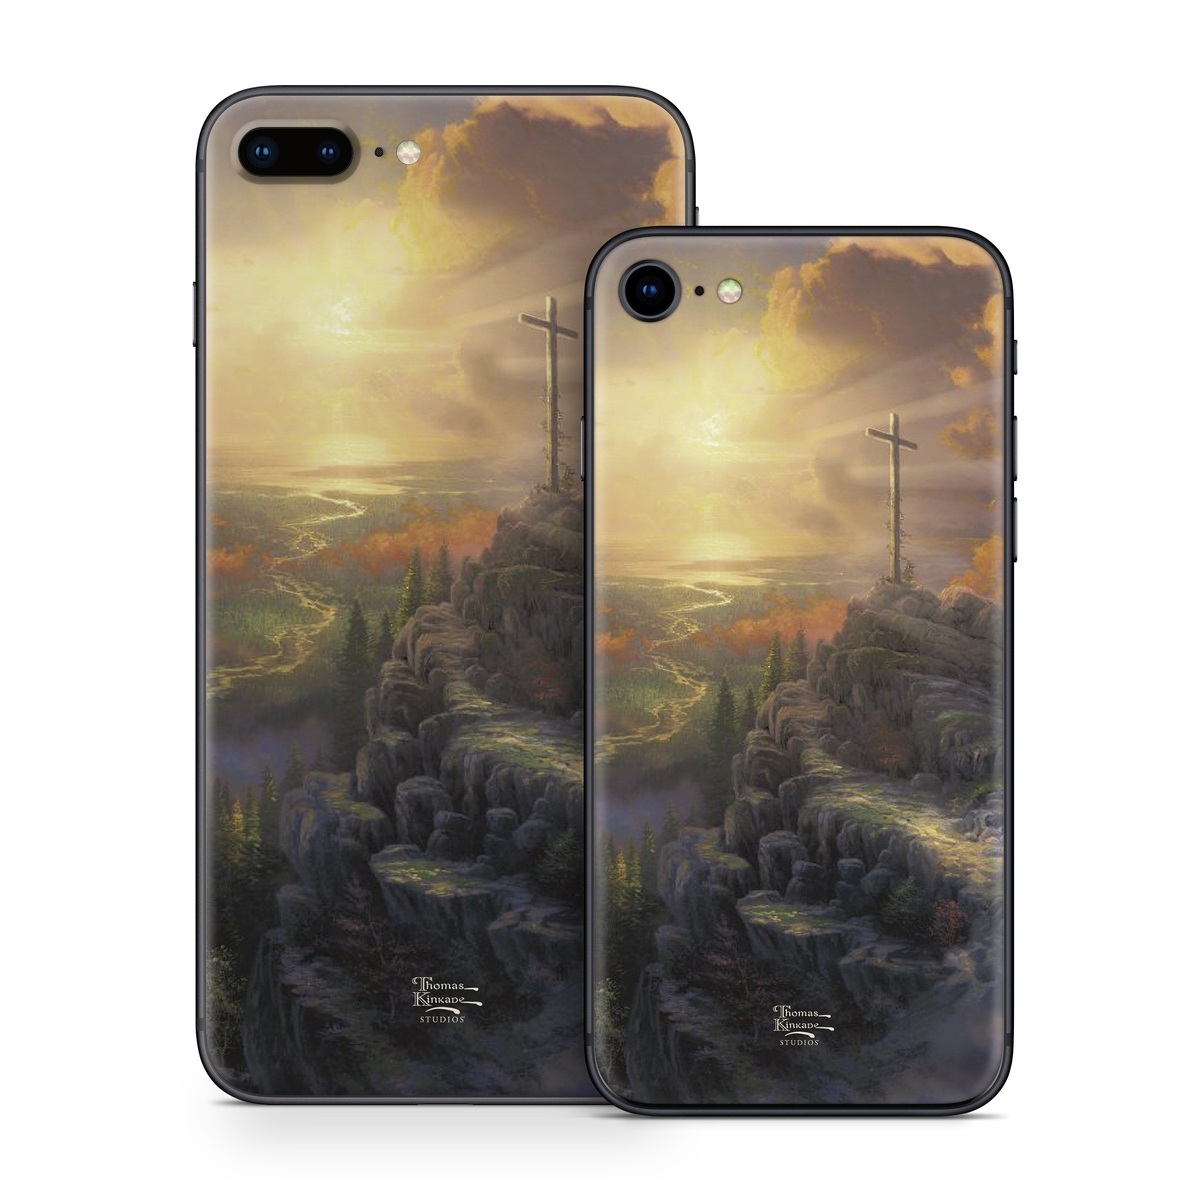 iPhone 8 Series Skin design of Painting, Natural landscape, Sky, Cross, Landscape, Visual arts, Art, Symbol, Acrylic paint, with black, gray, green, red colors